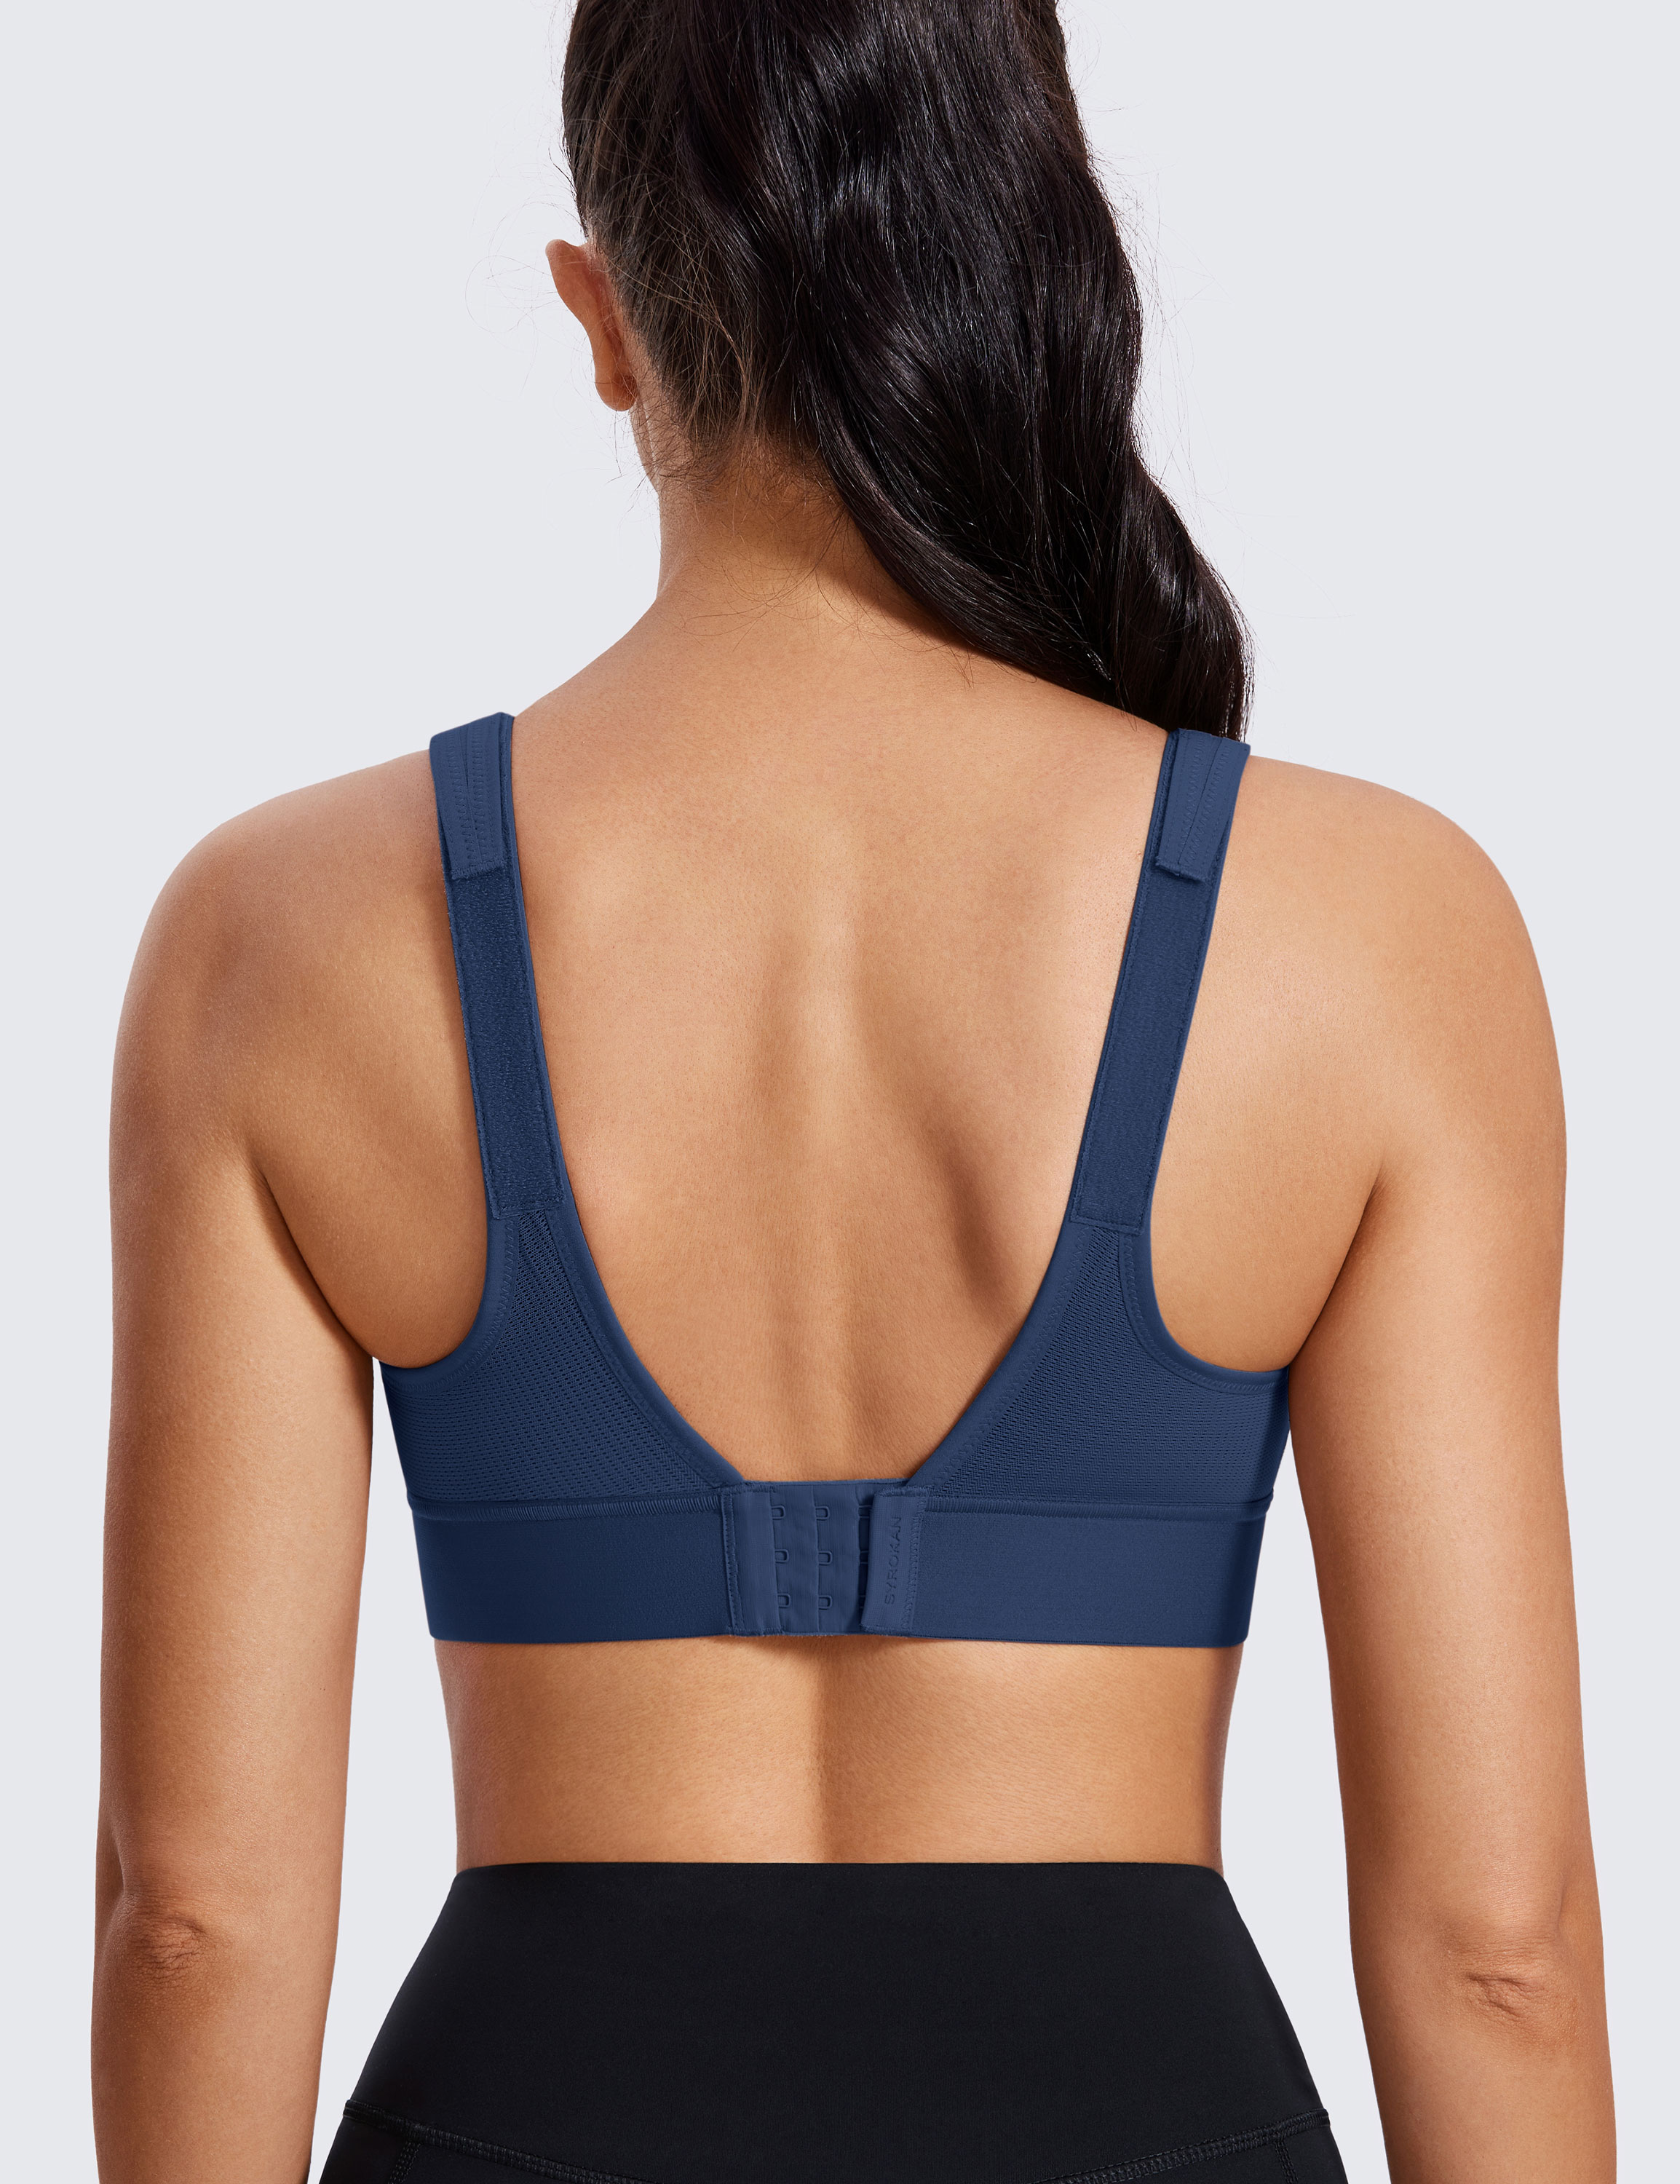 SYROKAN High Impact Sports Bras for Women Support Nigeria